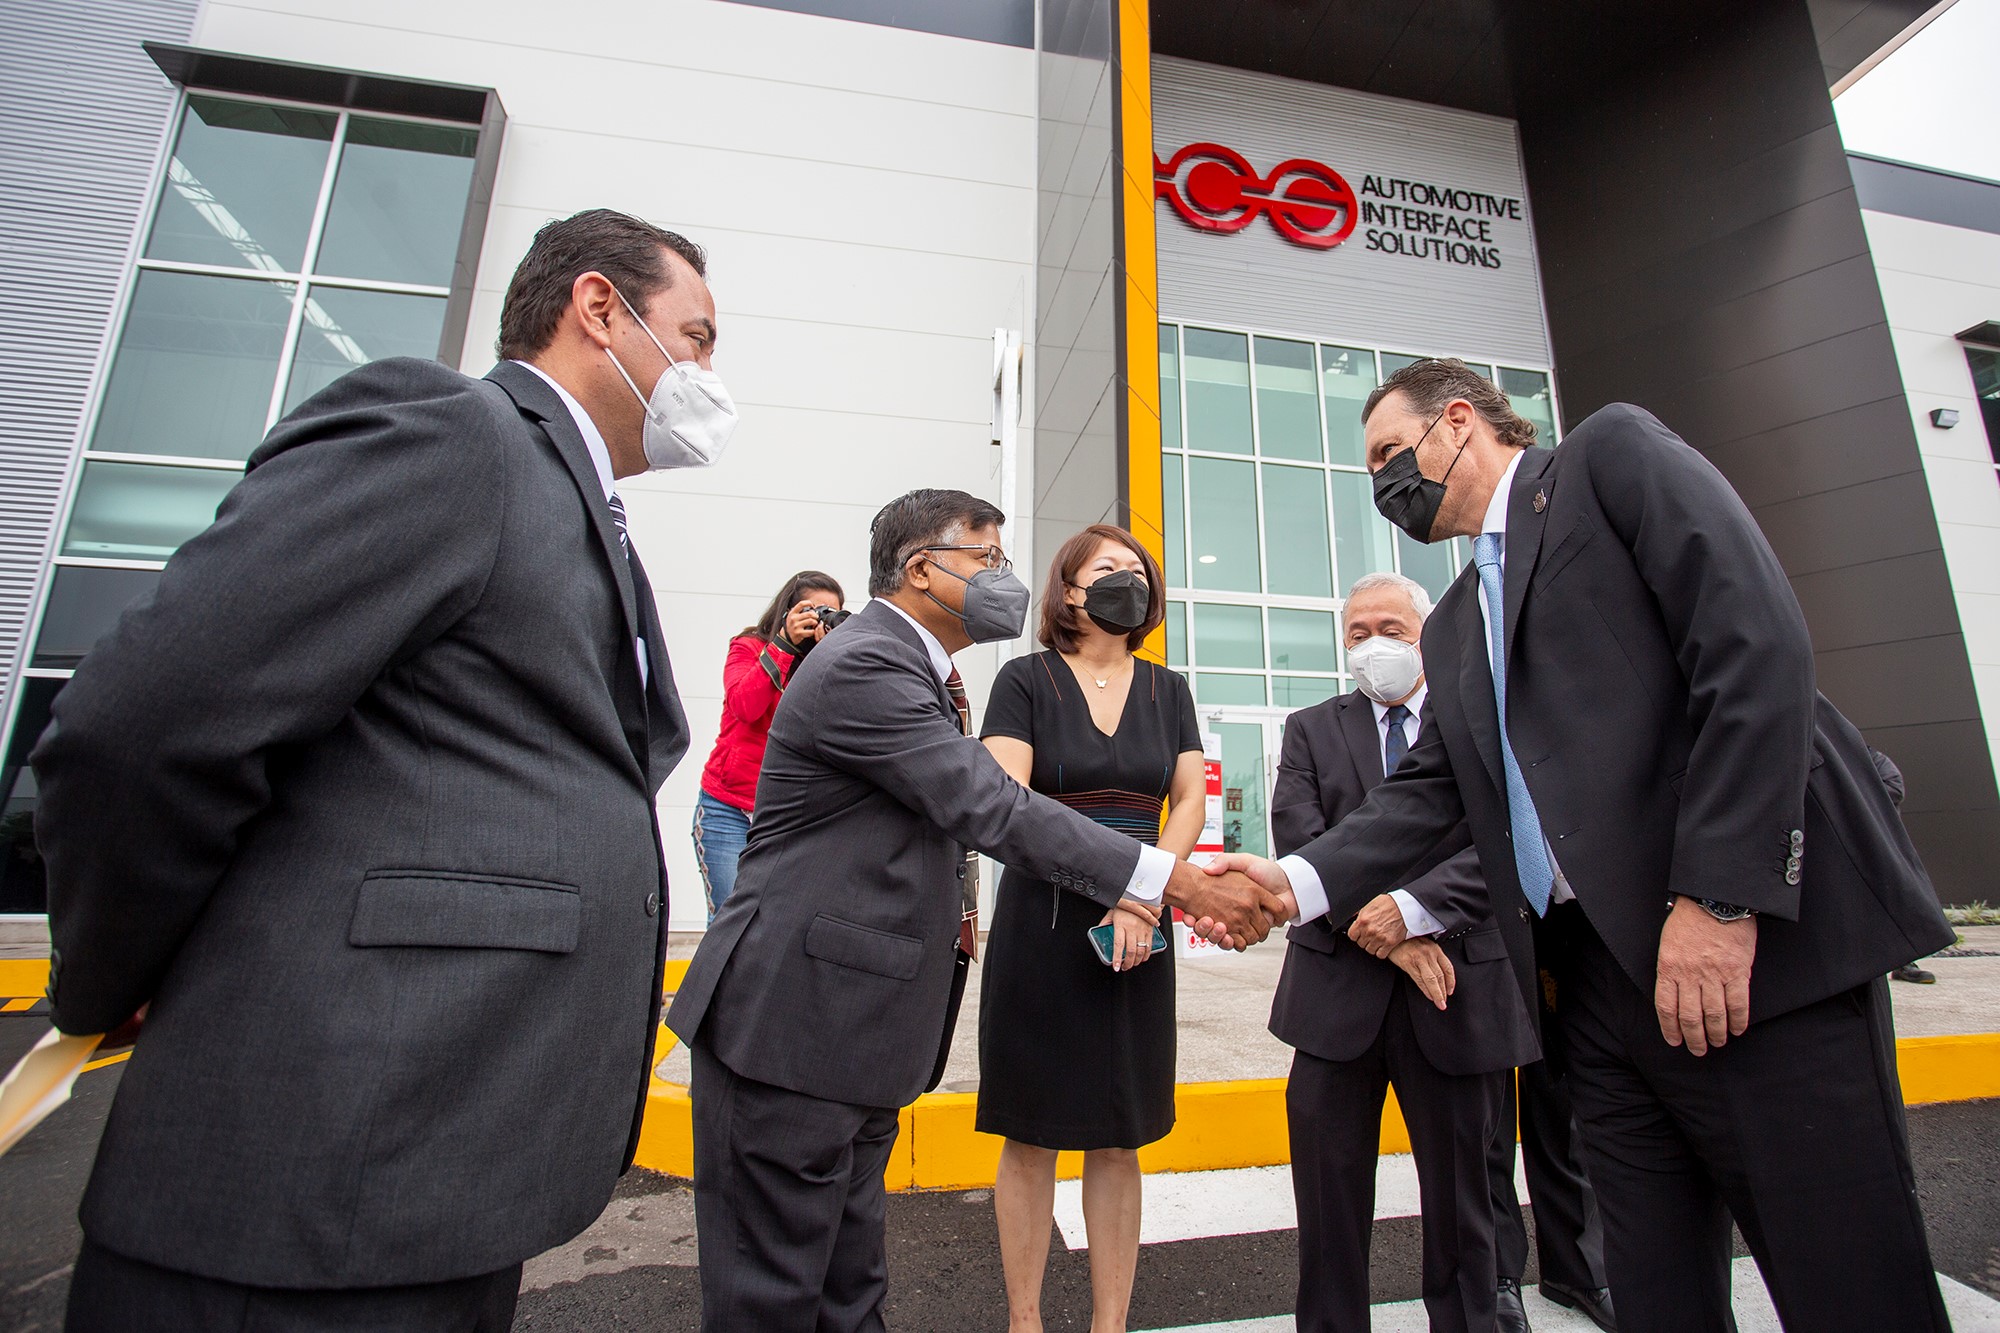 BCS Automotive Interface Solutions inaugurates its plant in Queretaro